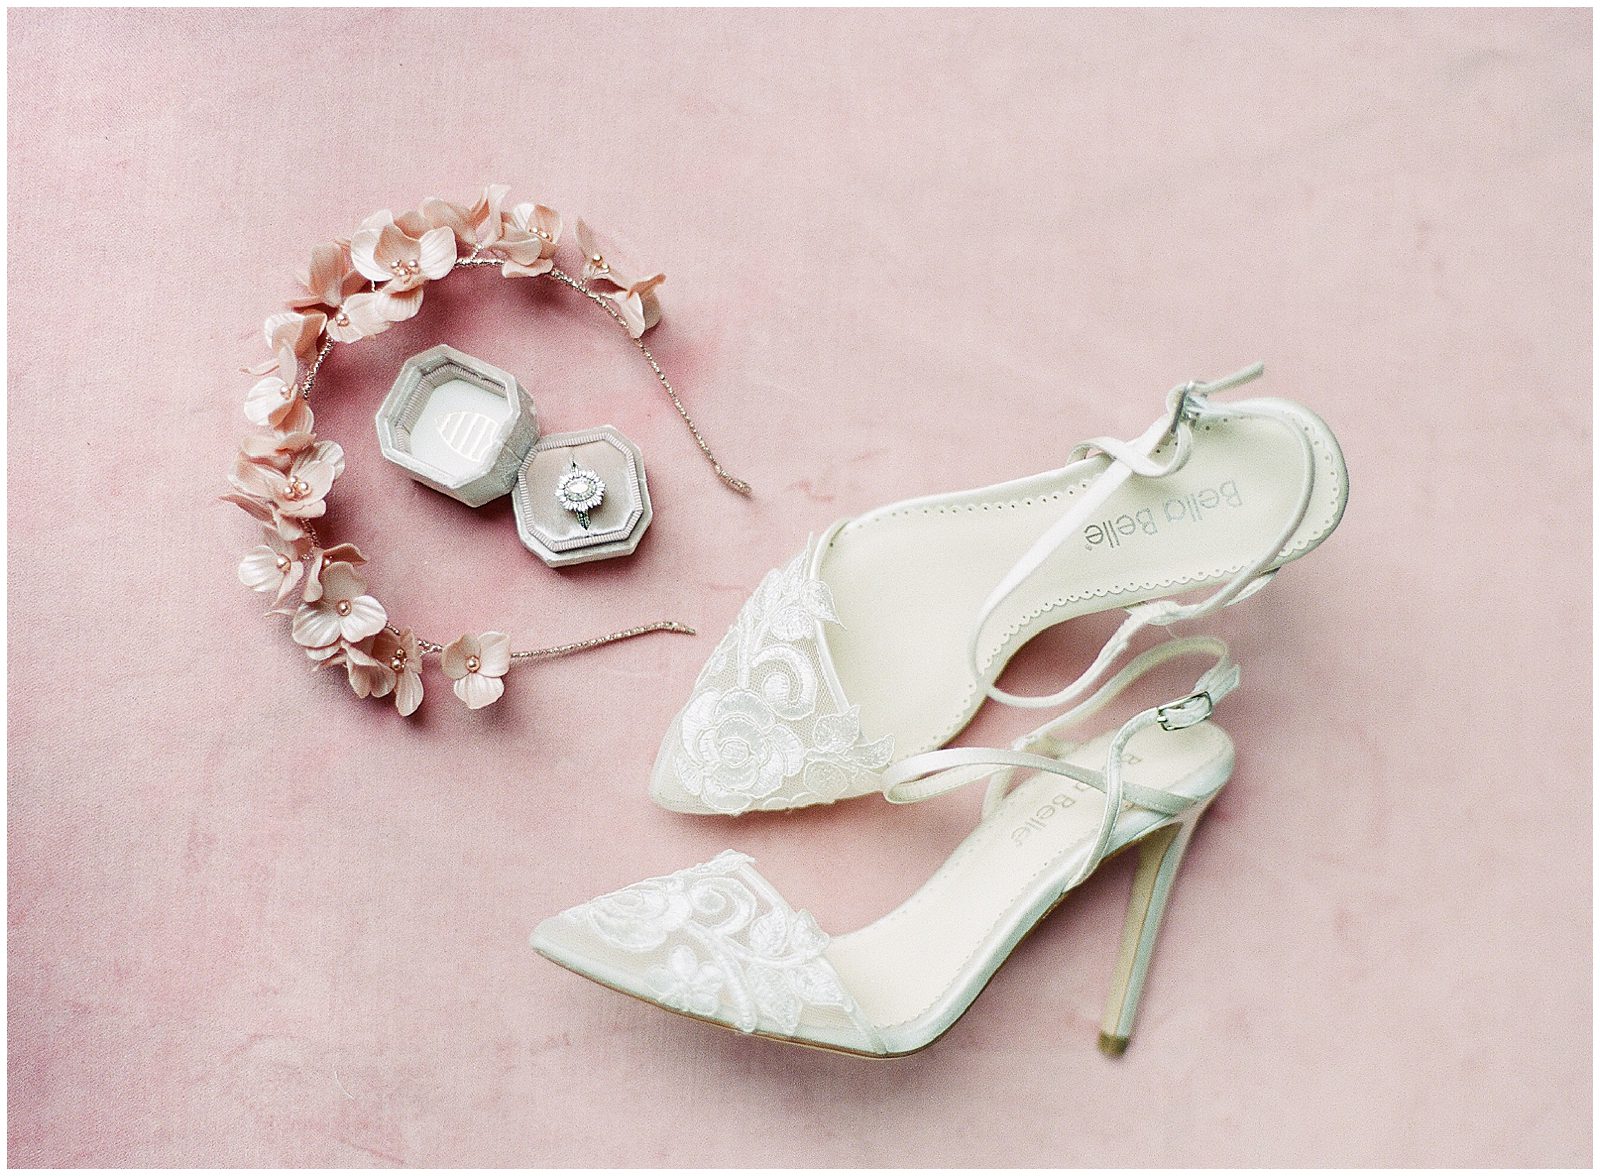 Central Park Wedding Bridal Details Headband Shoes and Ring Photo